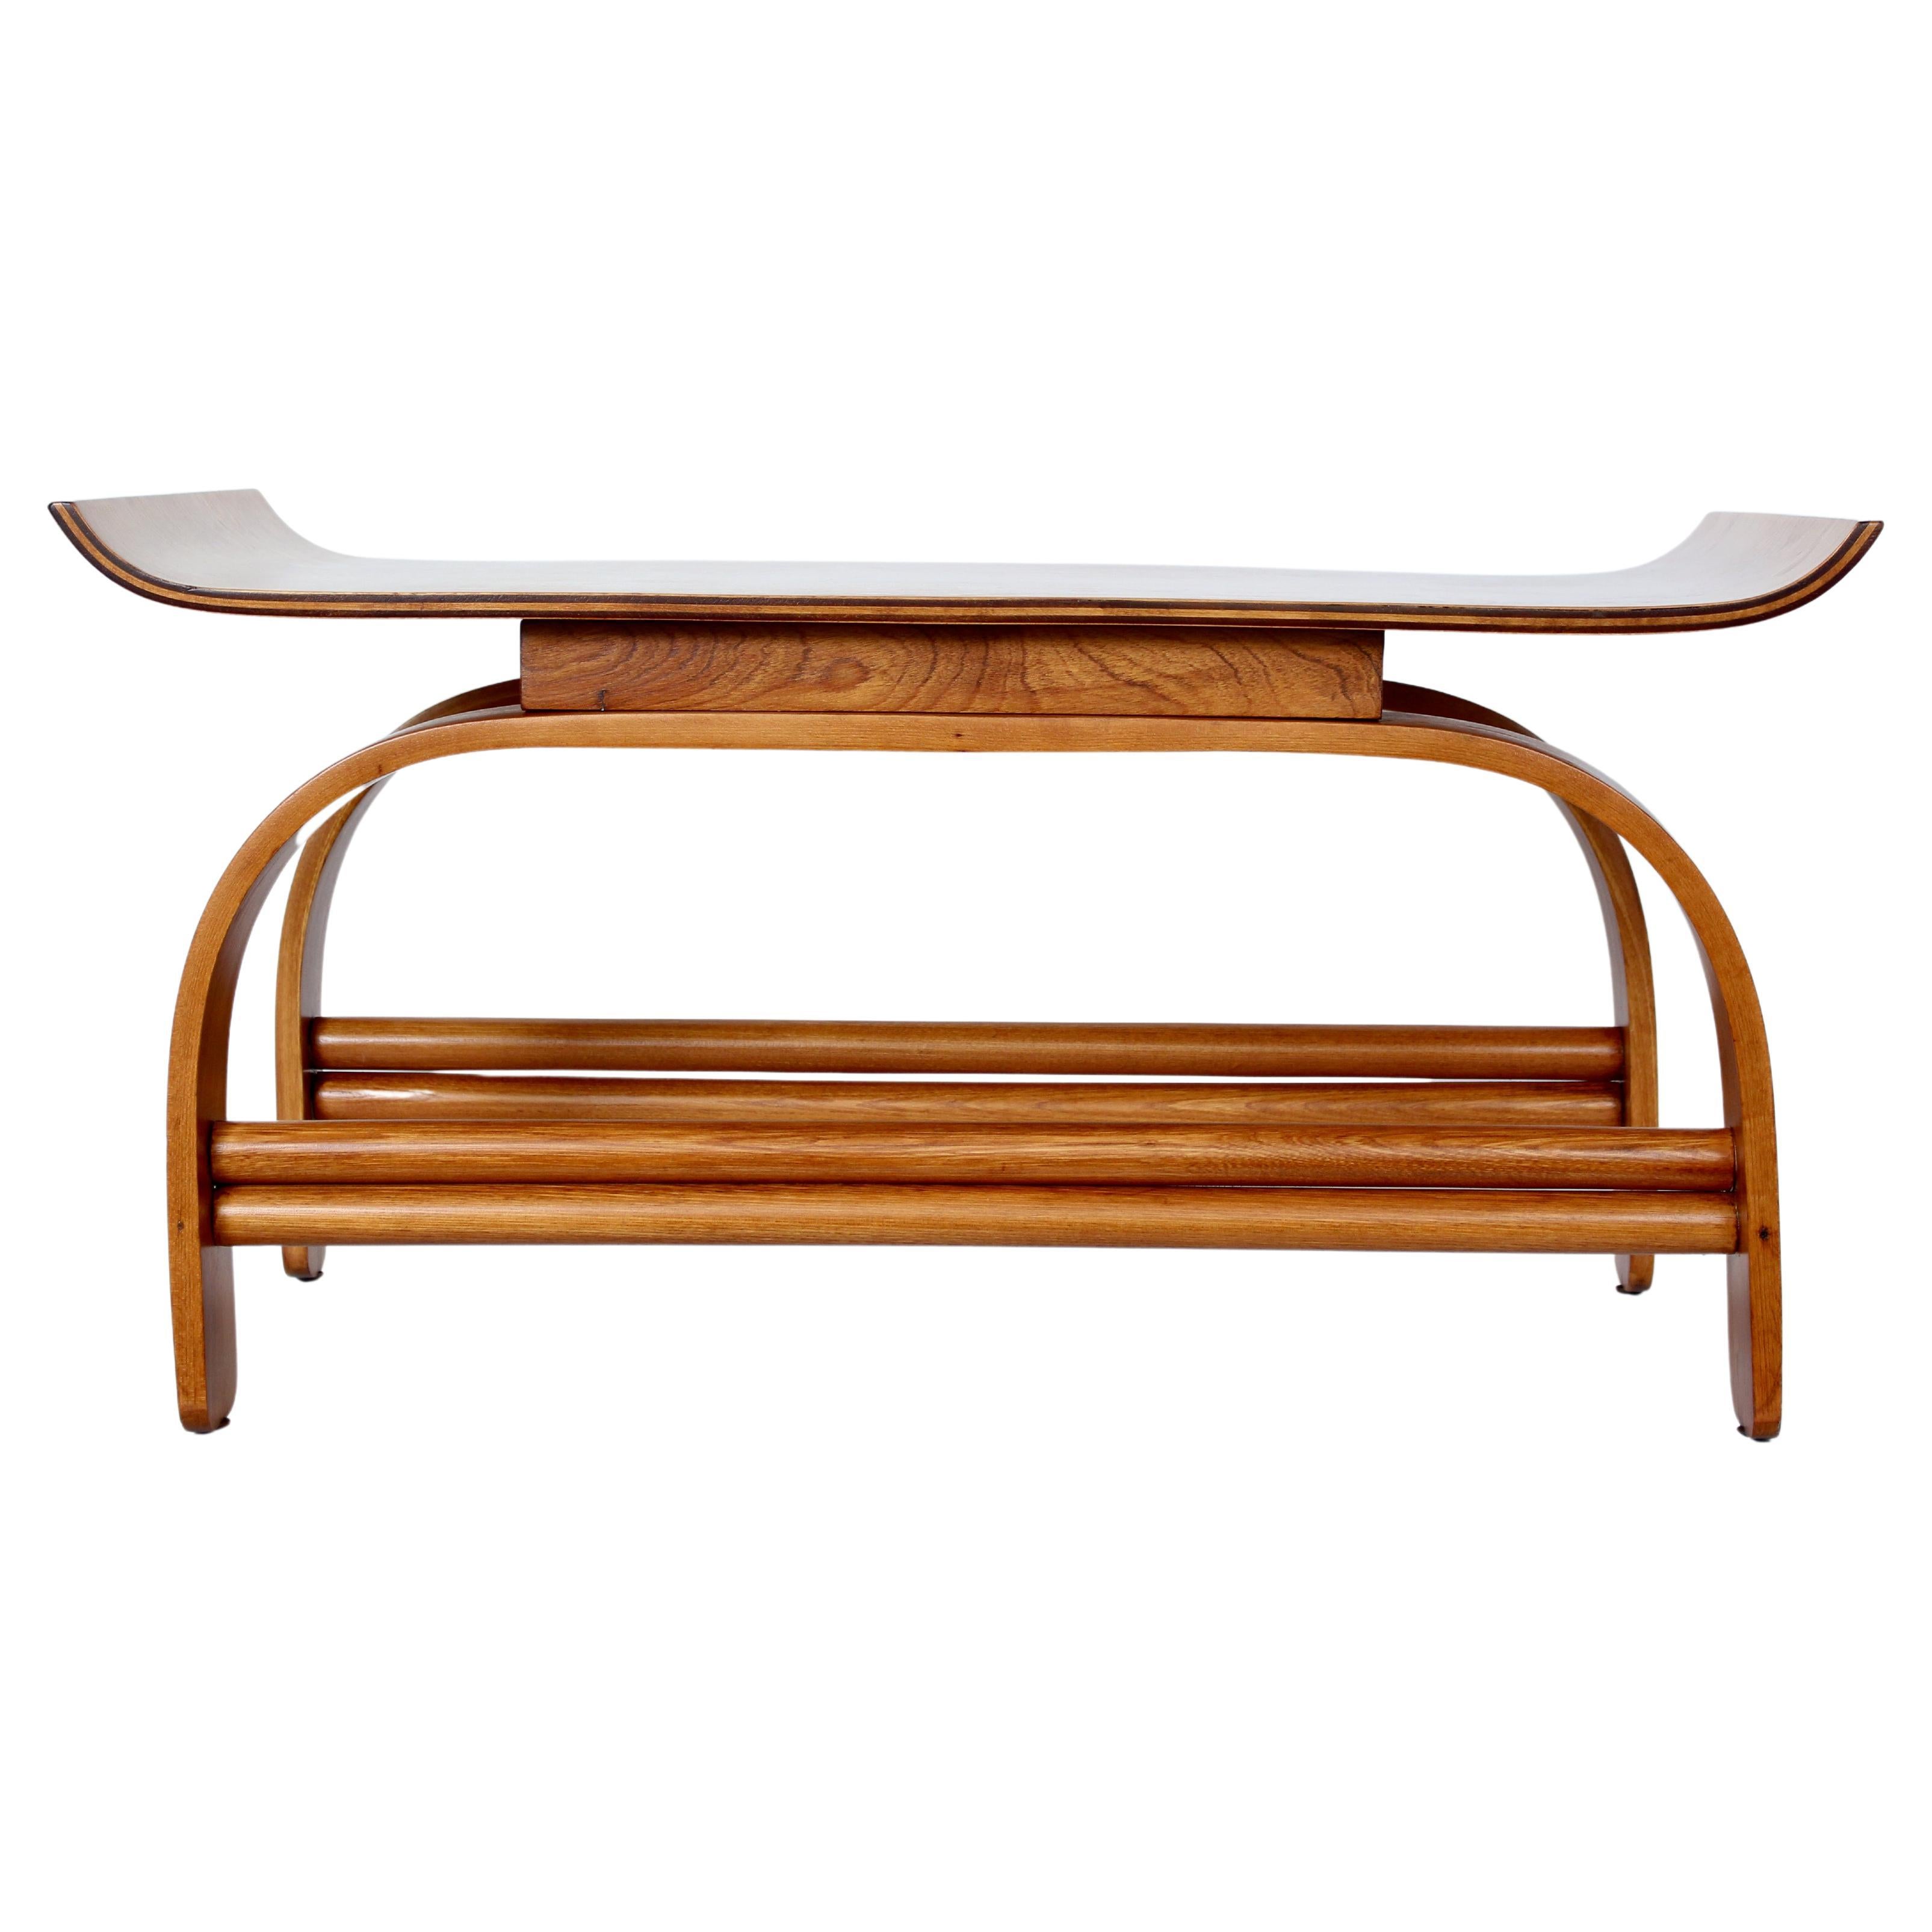 Early Gilbert Rohde for Heywood Wakefield Bentwood Coffee Table For Sale